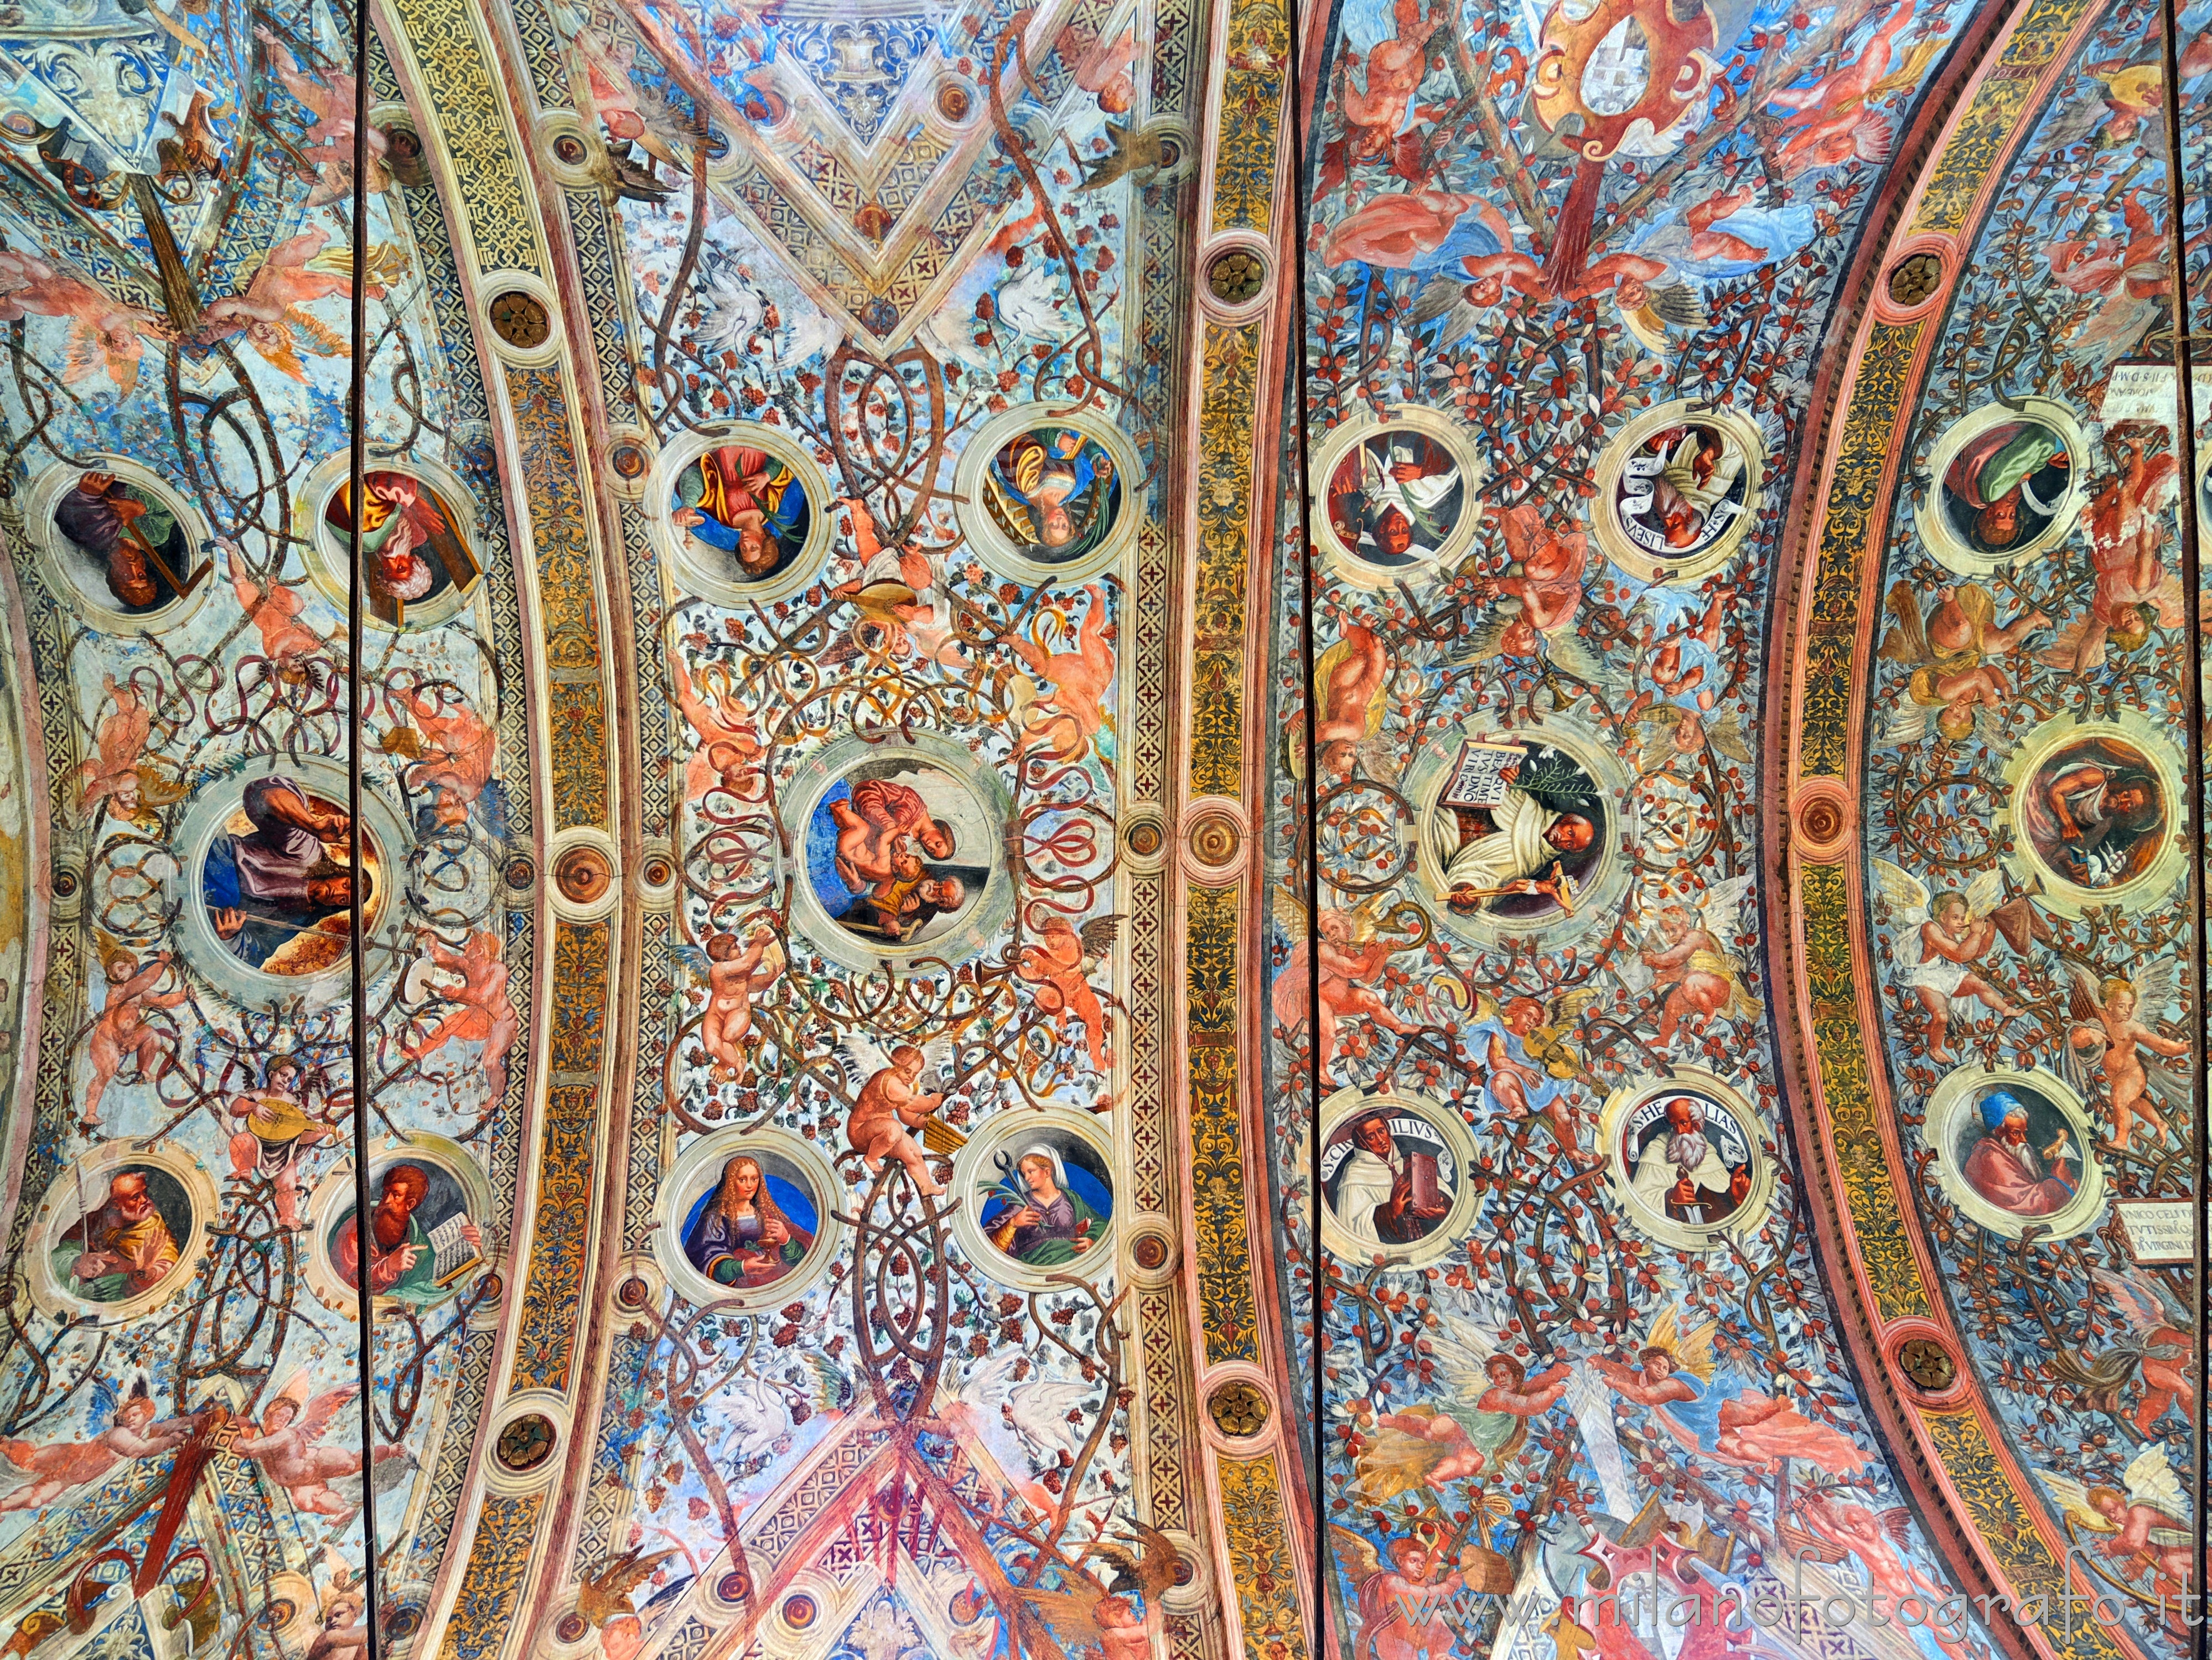 Soncino (Cremona, Italy): Ceiling of the Church of Santa Maria delle Grazie - Soncino (Cremona, Italy)